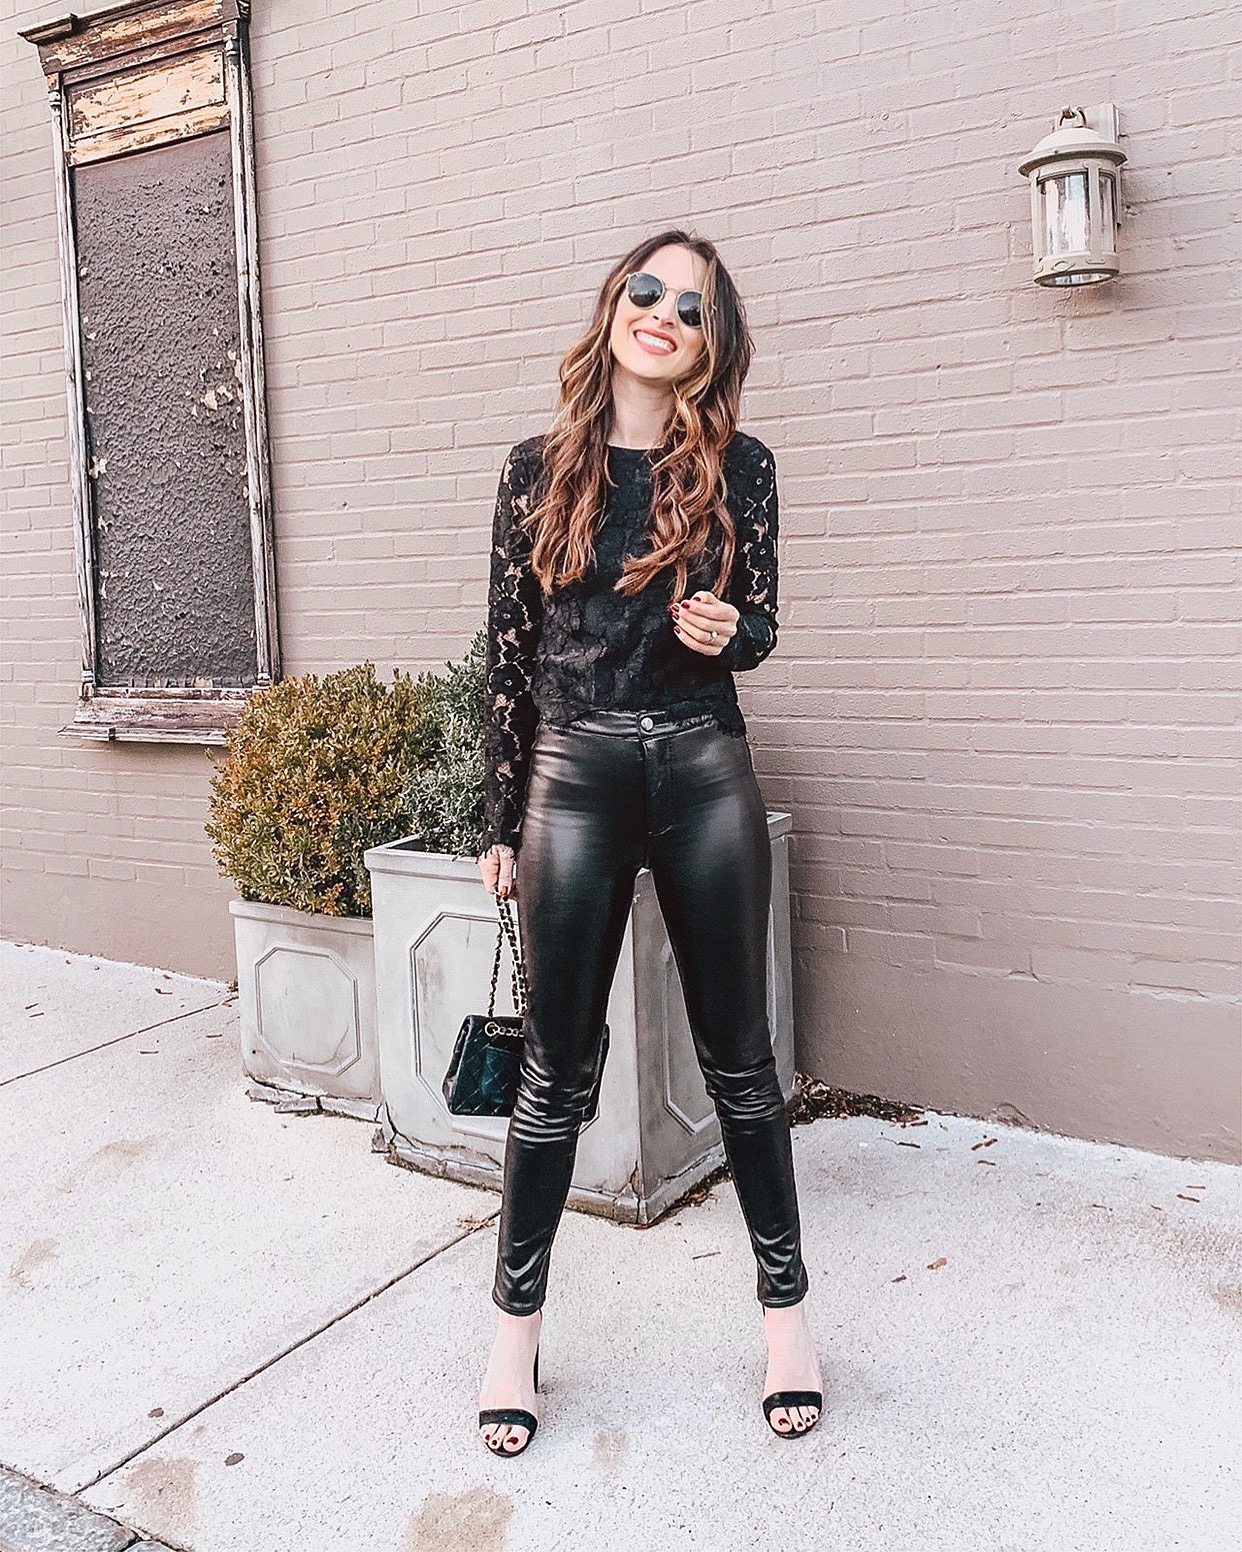 faux leather pants outfits